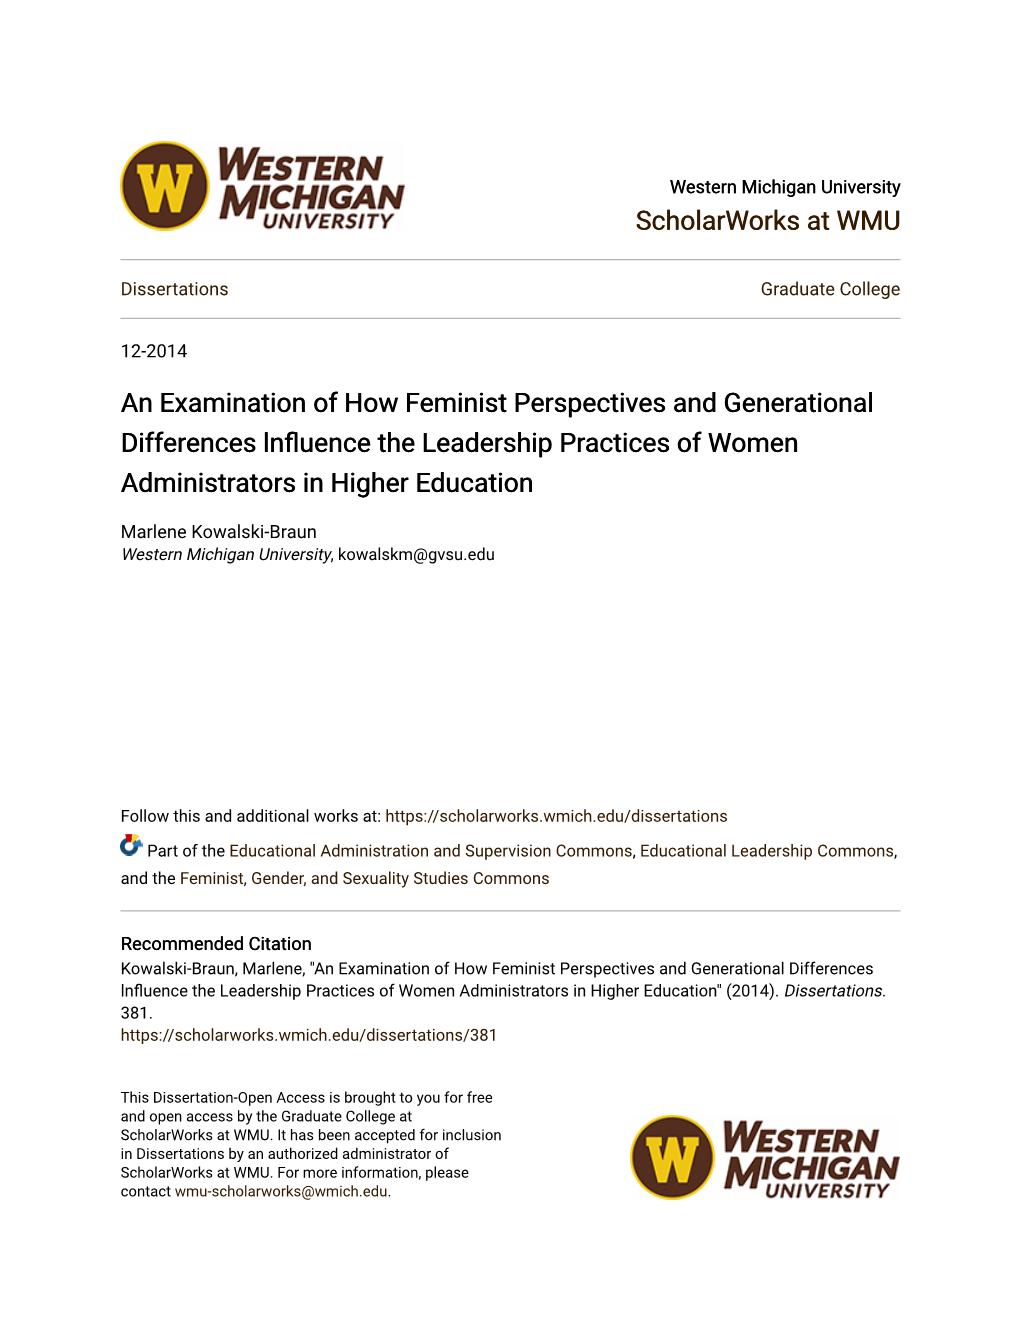 An Examination of How Feminist Perspectives and Generational Differences Lnfluence the Leadership Practices of Women Administrators in Higher Education